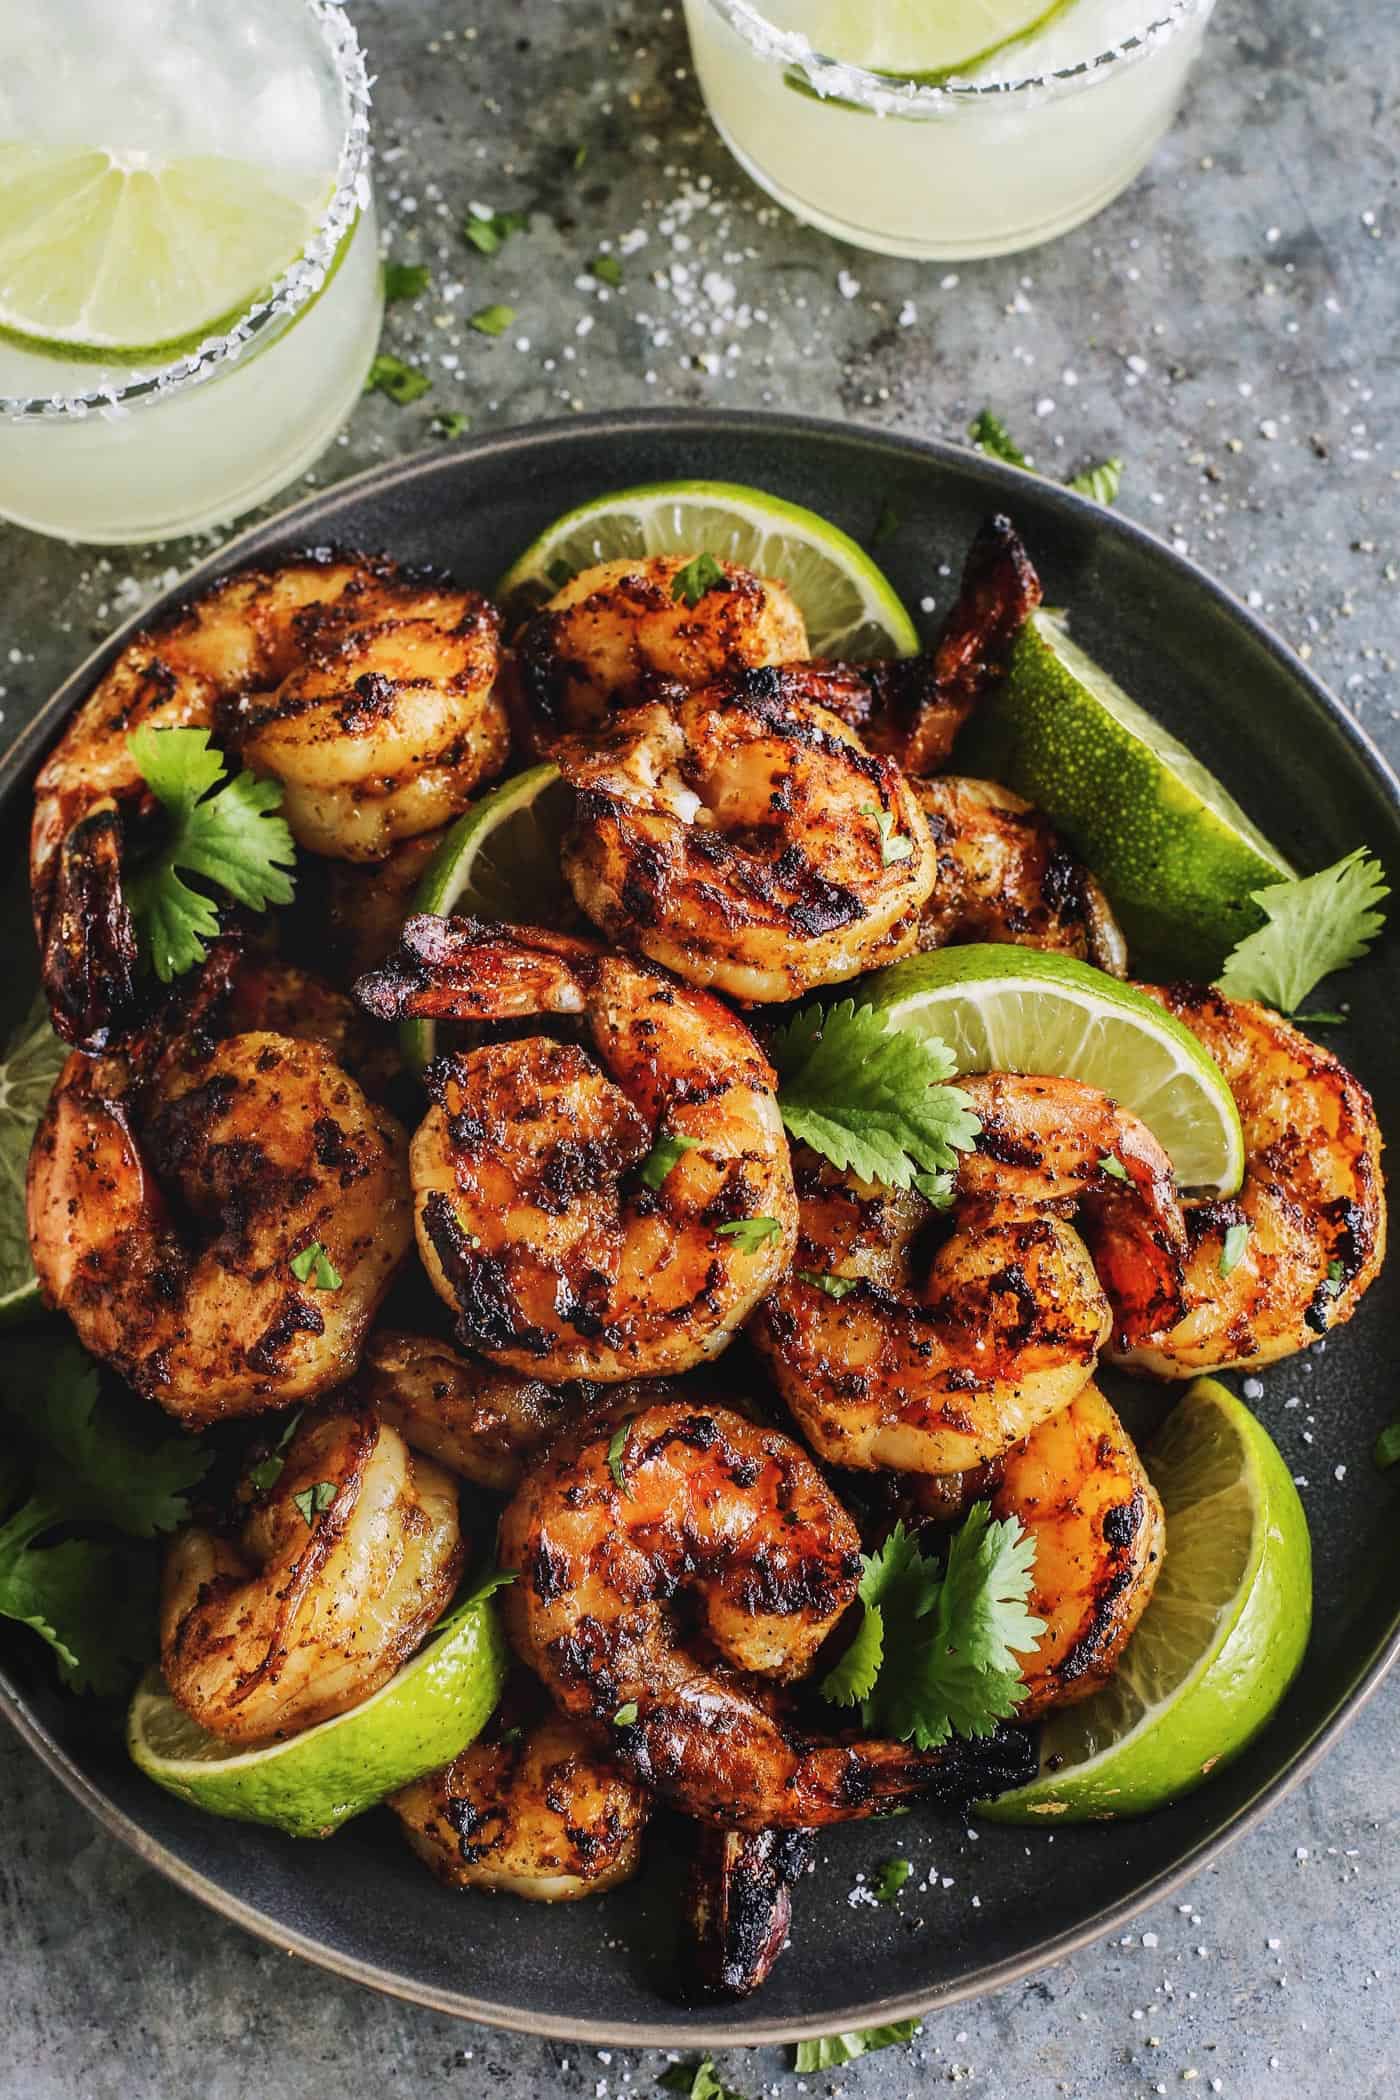 Grilled shrimp and lime wedges on black plate, plus two margaritas.